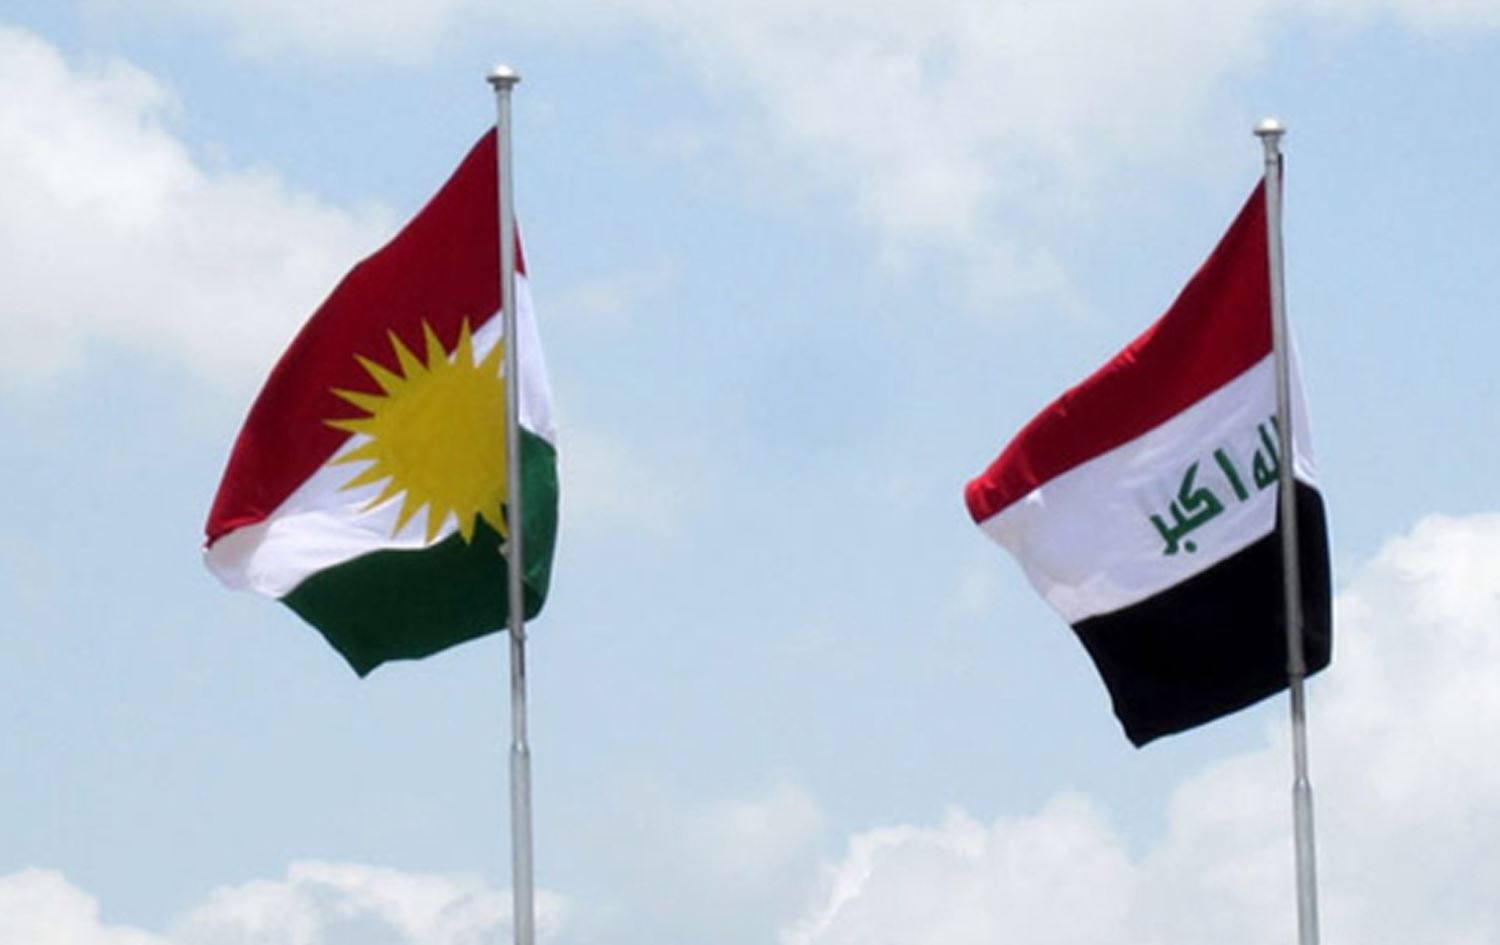 Kurdistan Parliament recommends the government to reach an agreement with Baghdad on financial dues